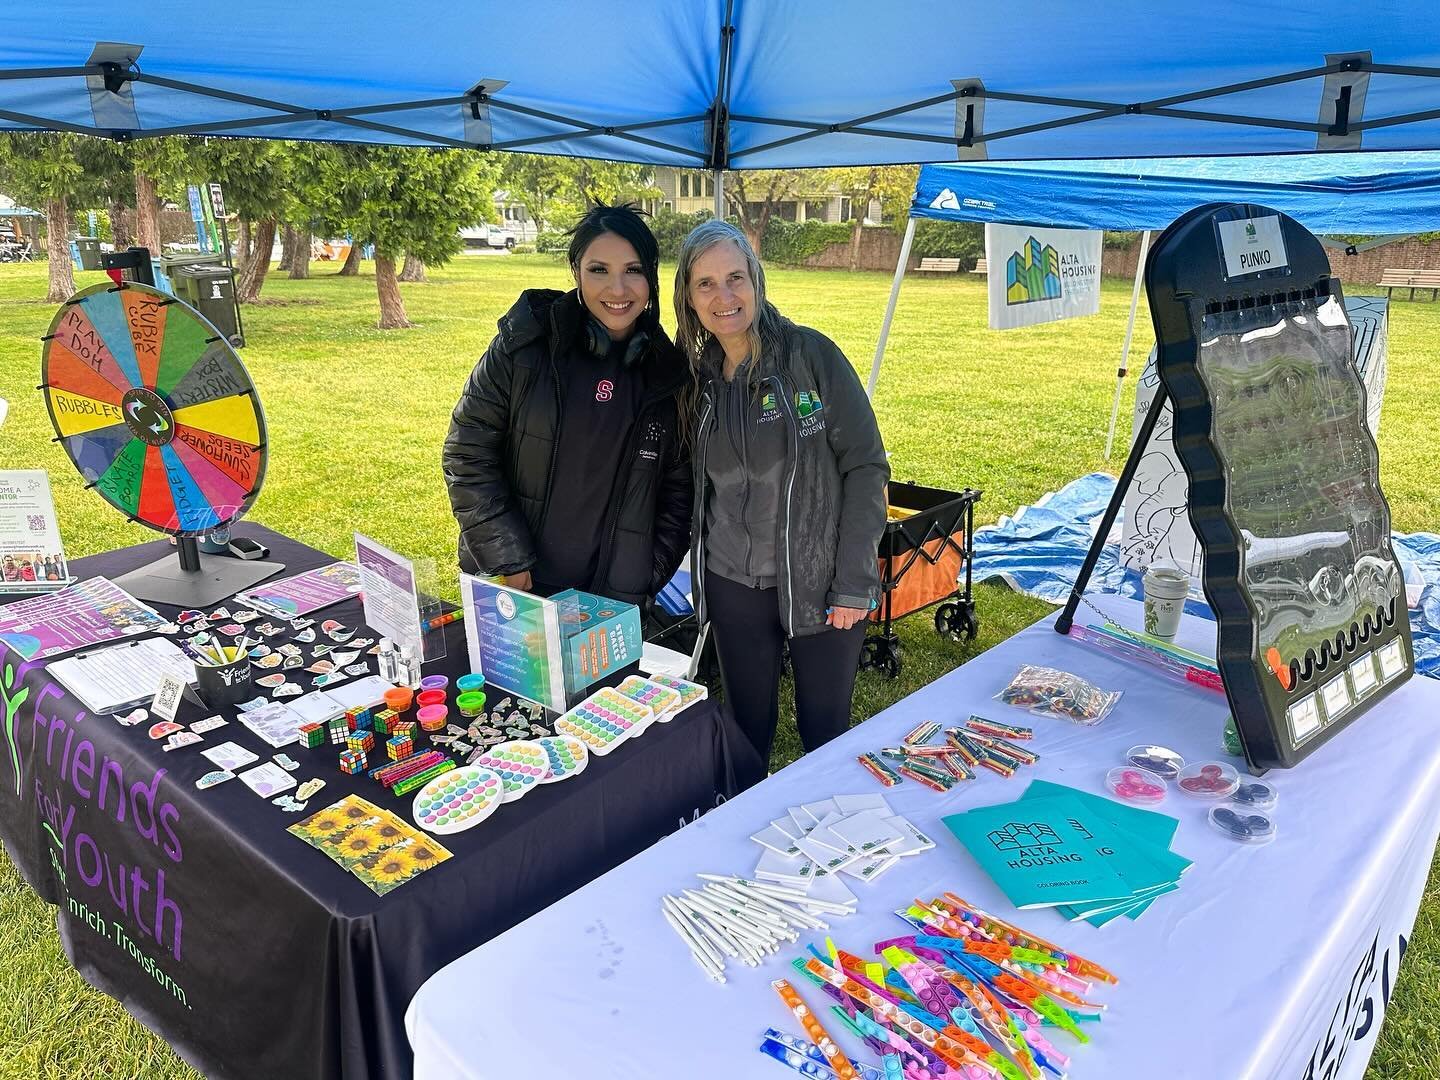 We had a great time at the May Fete Parade in Palo Alto last weekend! Huge thanks to @kiwanis_club_pa for hosting such an incredible community event. Despite the weather, we had a blast spreading the word about FFY, connecting with other local organi